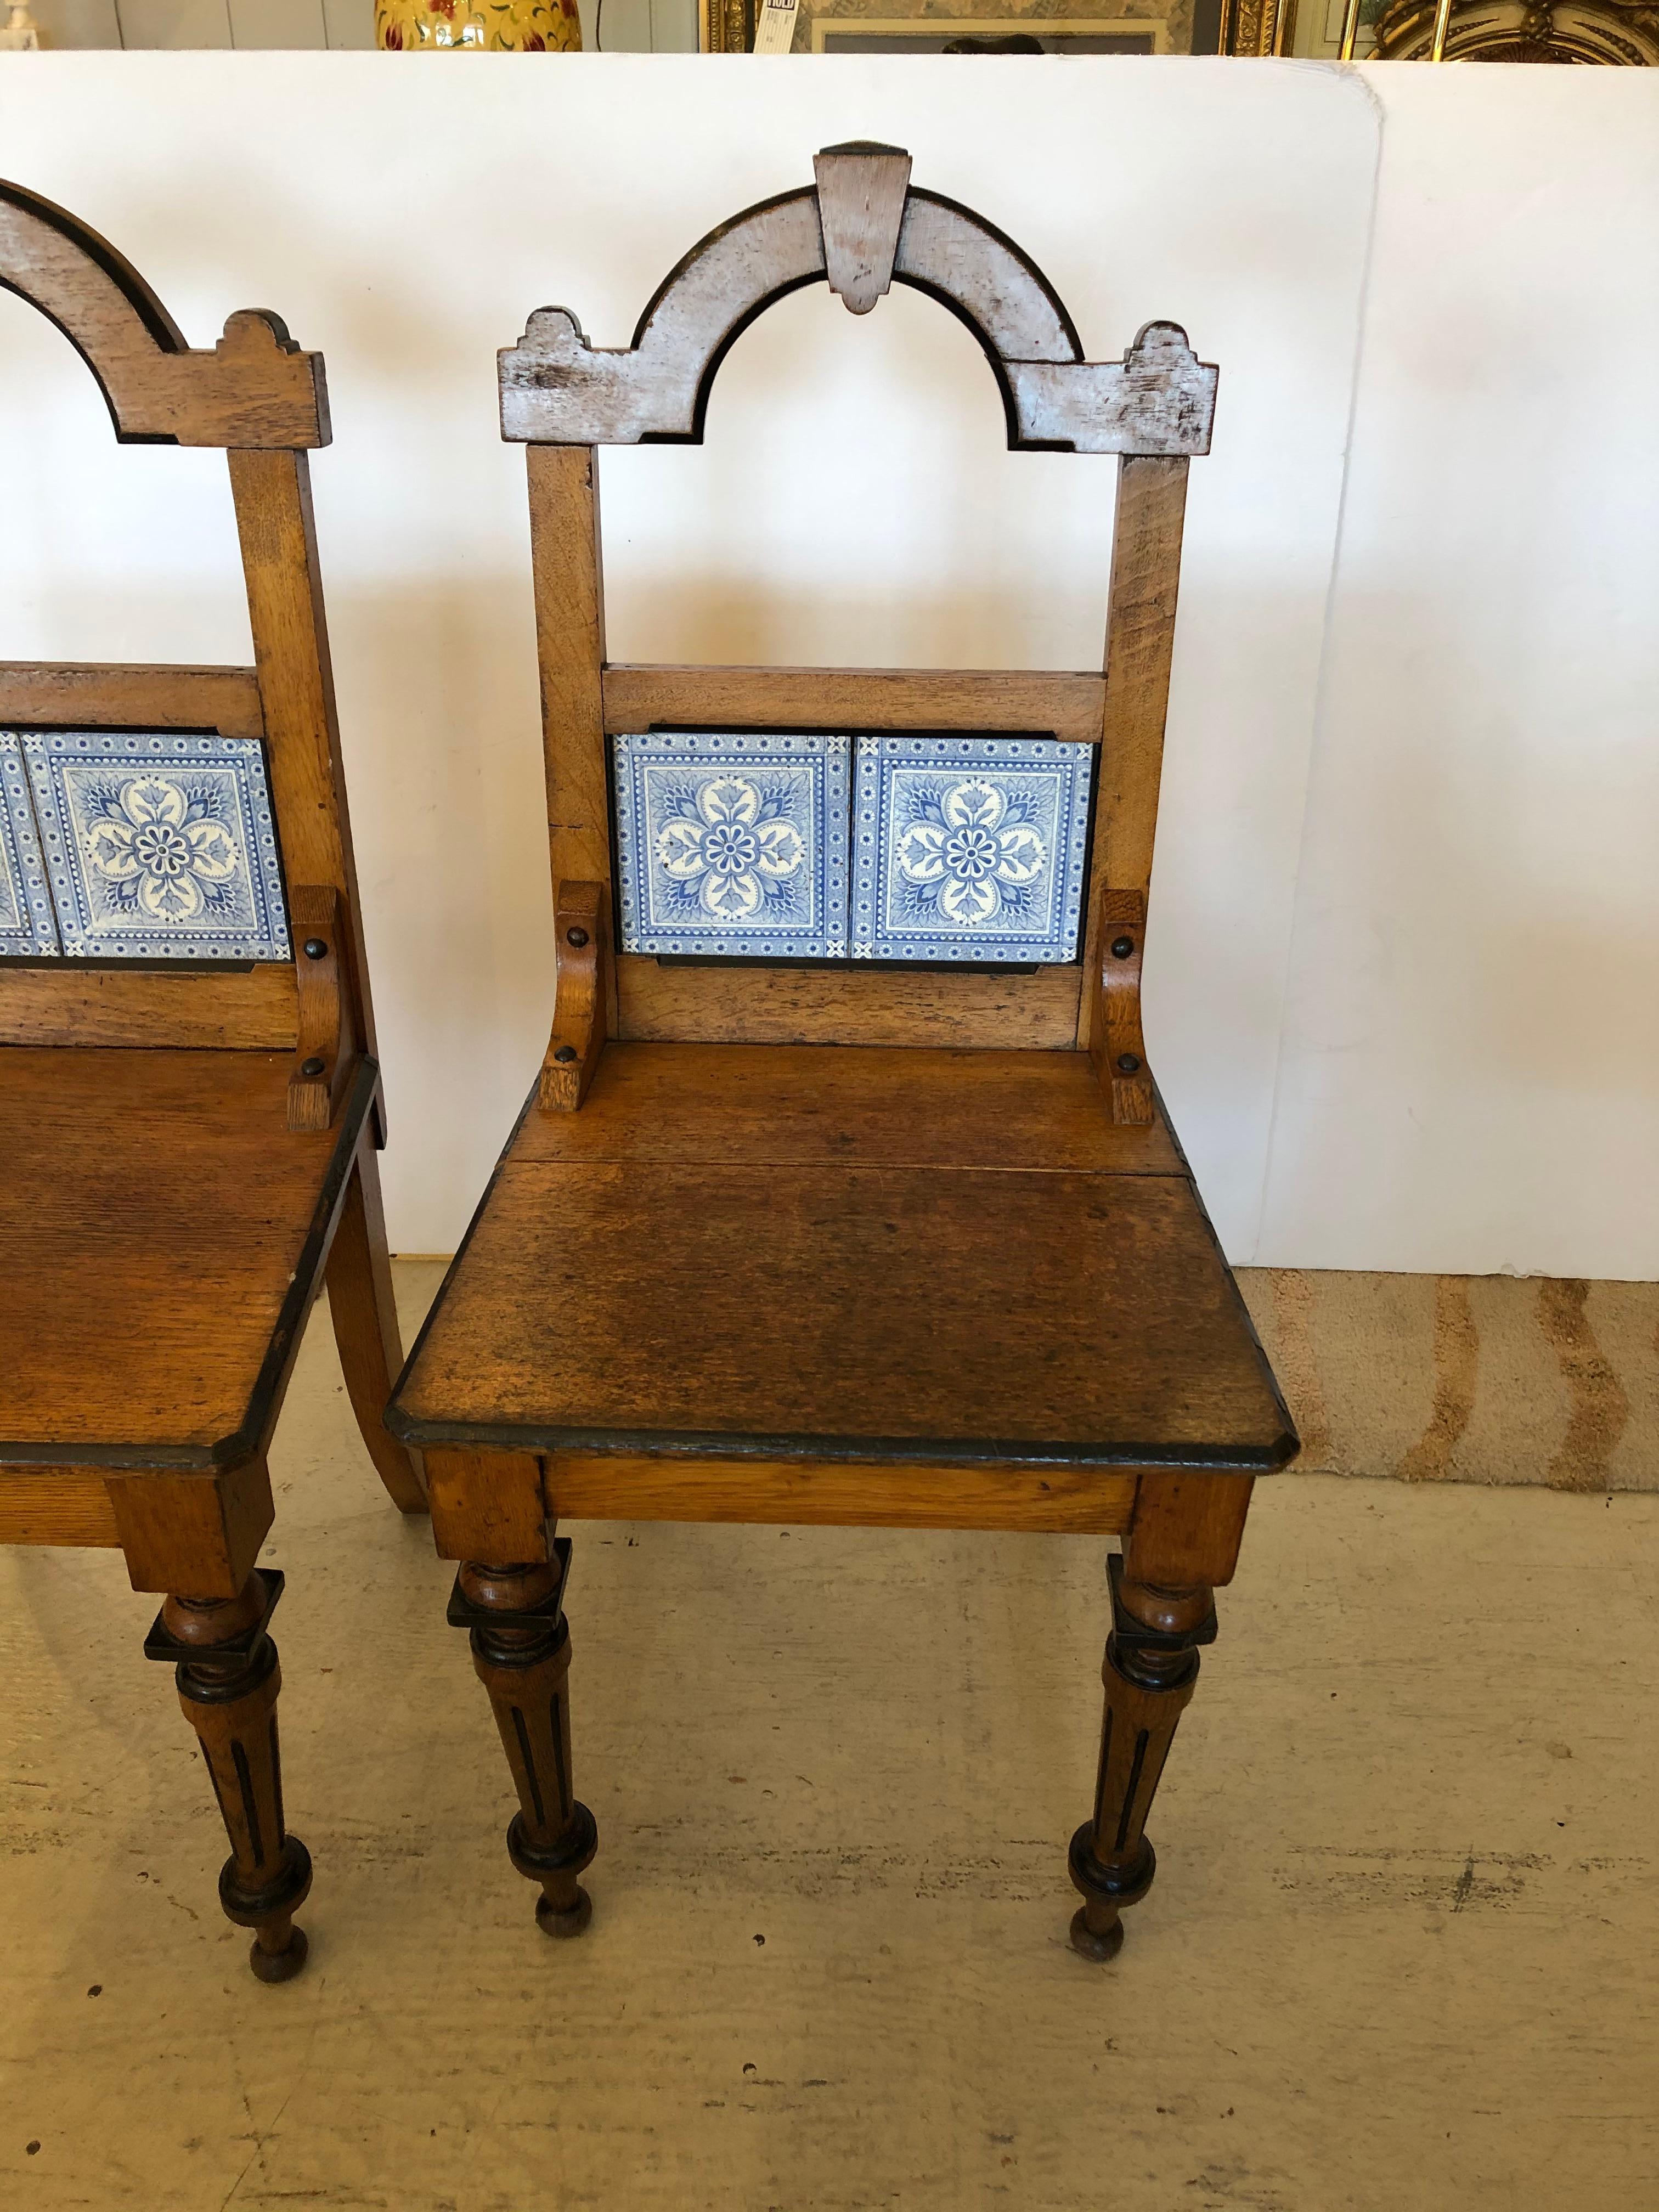 We've never seen a pair like these totally charming French honey oak upright side or hall chairs having arts and crafts style, blue and white Delft tile on the backs, and charming turned legs and scalloped tops. Sturdy and functional as extra